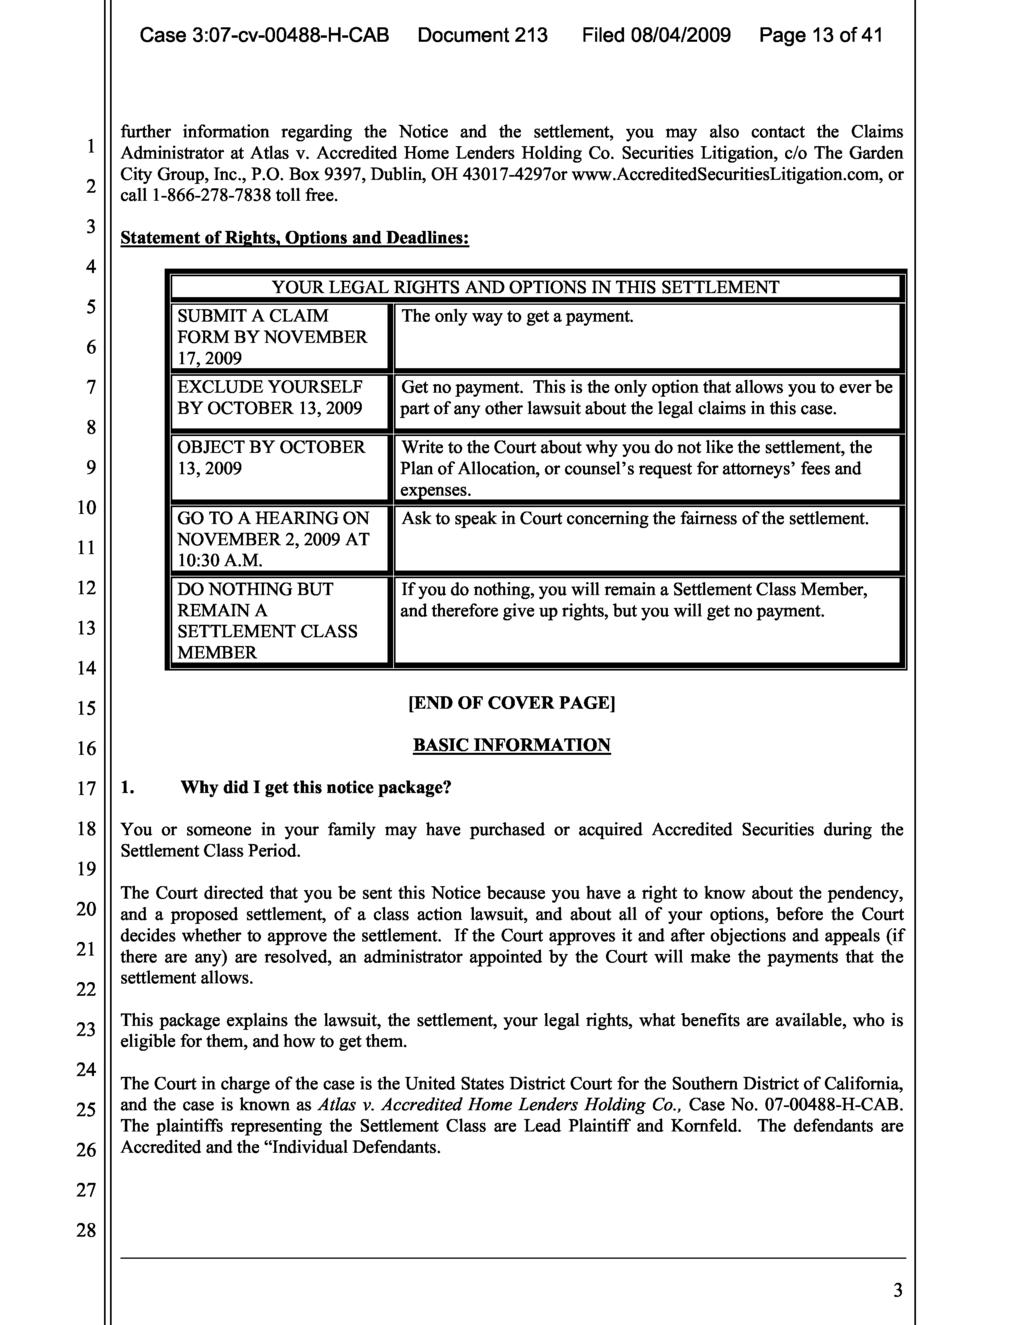 Case 3:07-cv-0088-H-CAB Document 213 Filed 08/0/2009 Page 13 of 1 further information regarding the Notice and the settlement, you may also contact the Claims 1 Administrator at Atlas v.